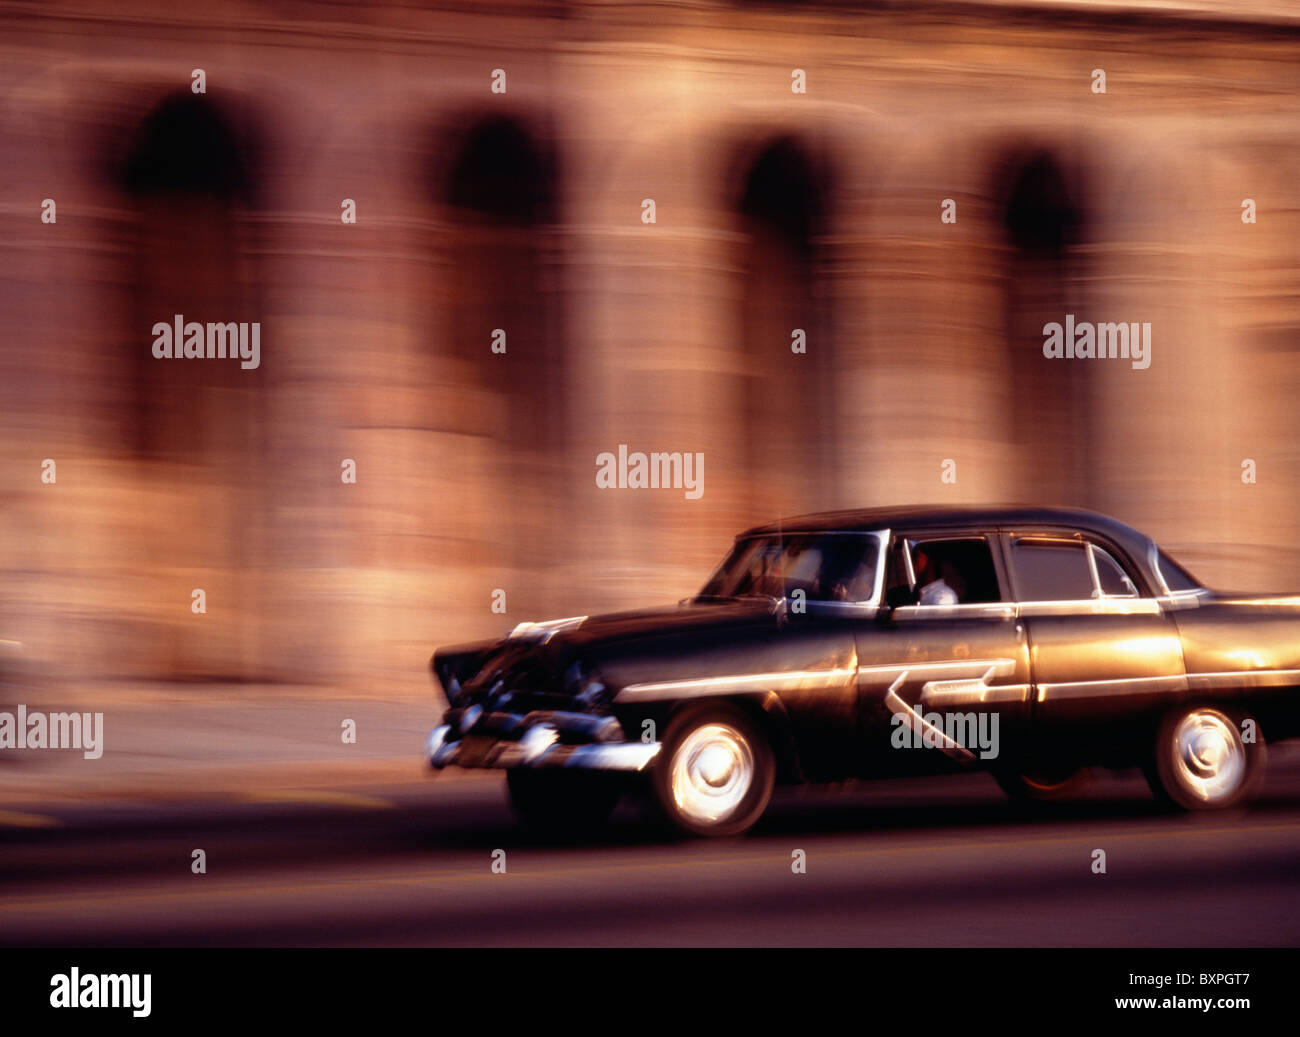 Vintage Car Driving, Blurred Motion Stock Photo